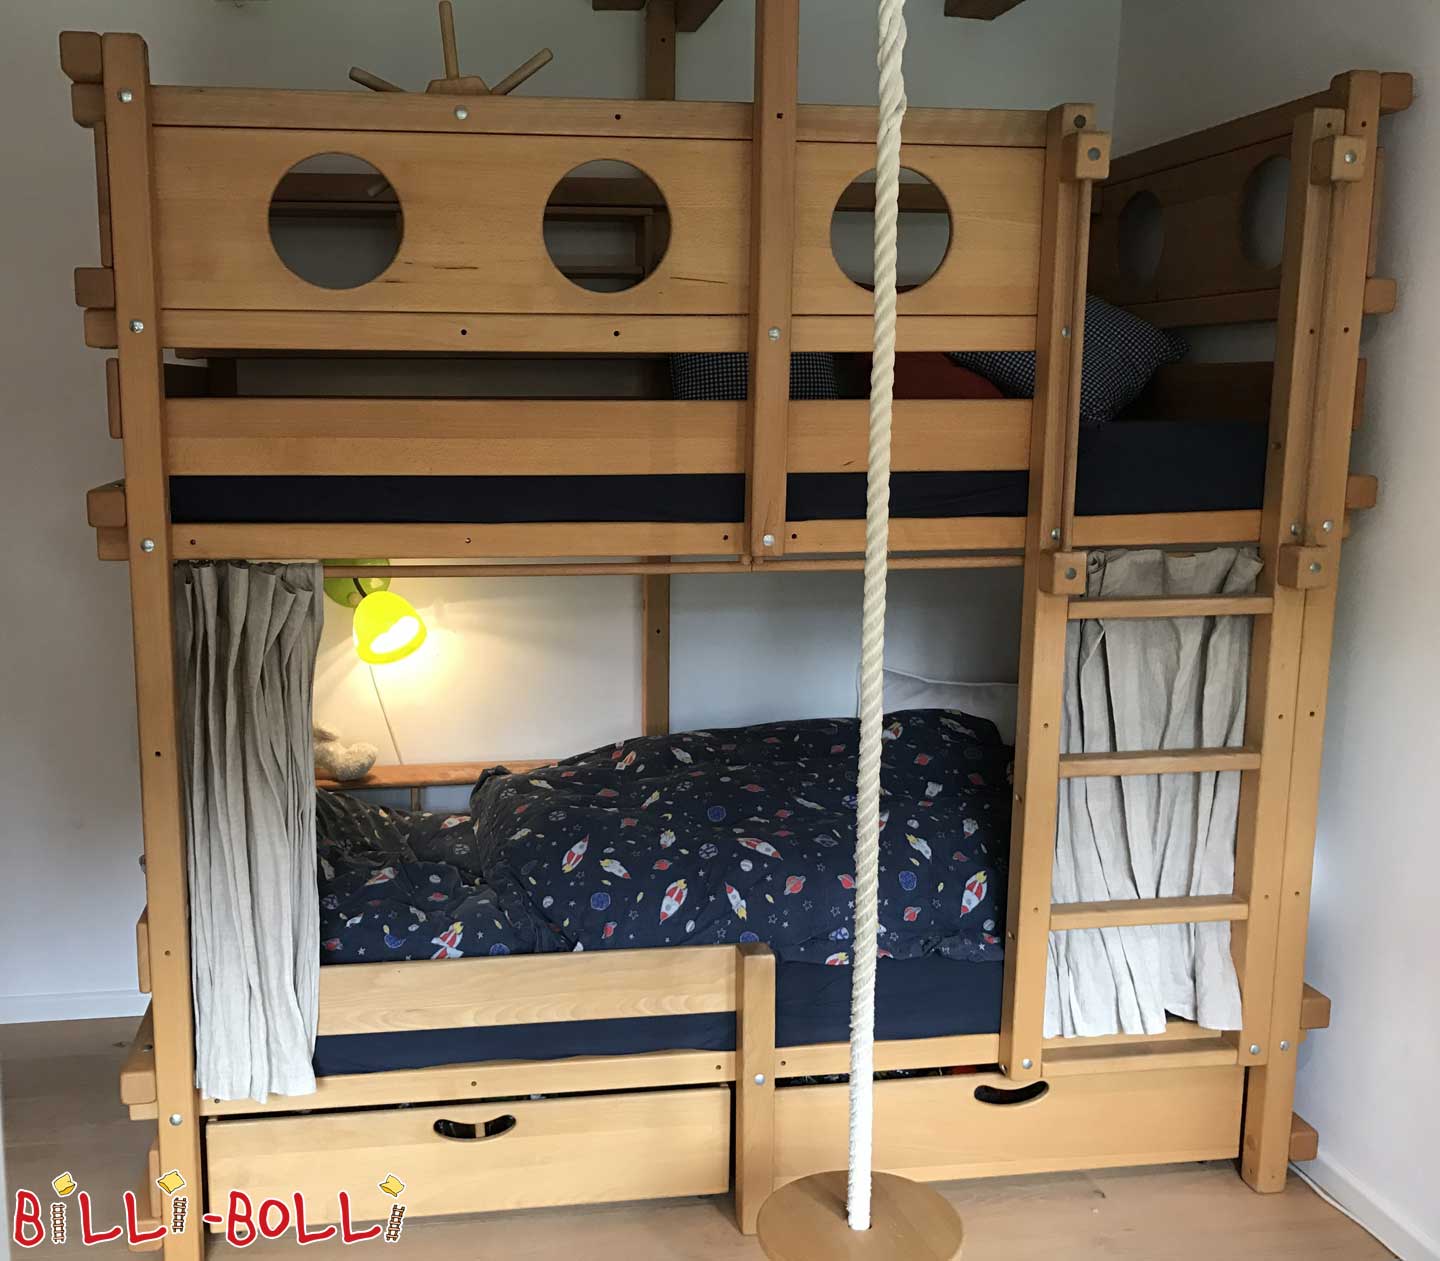 Bunk bed, 90 x 200 cm, oiled-waxed beech (Category: second hand loft bed)